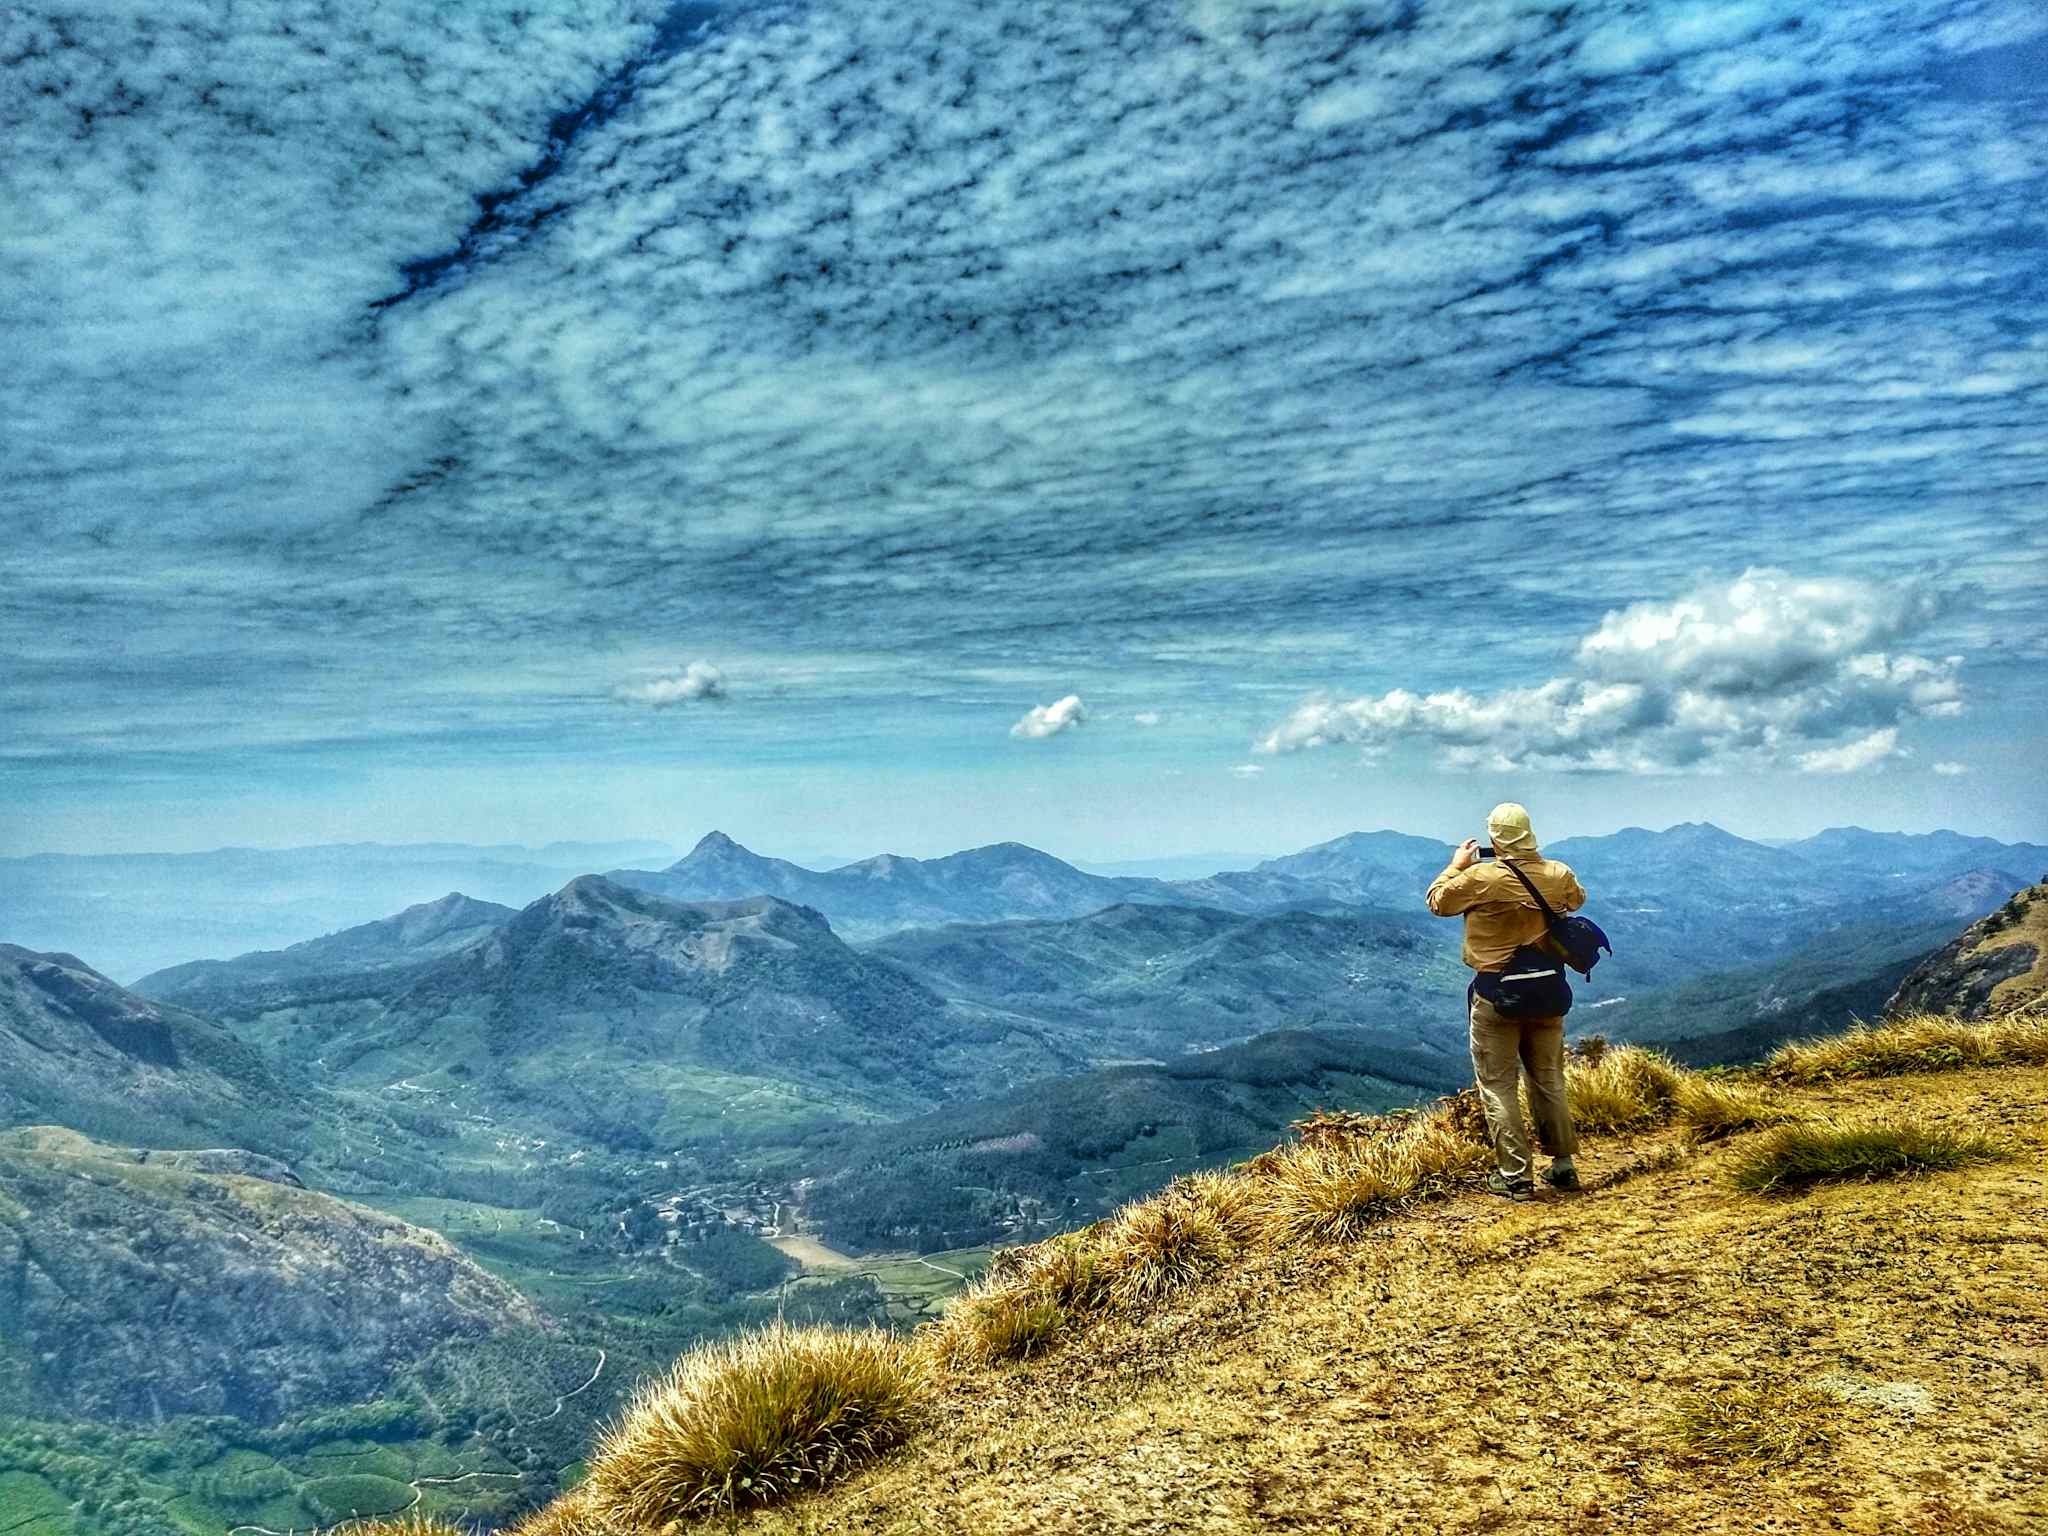 A hiker takes a photo from the top of Meesapulimala, a mountain in India. Photo: India Intrepid DMC.